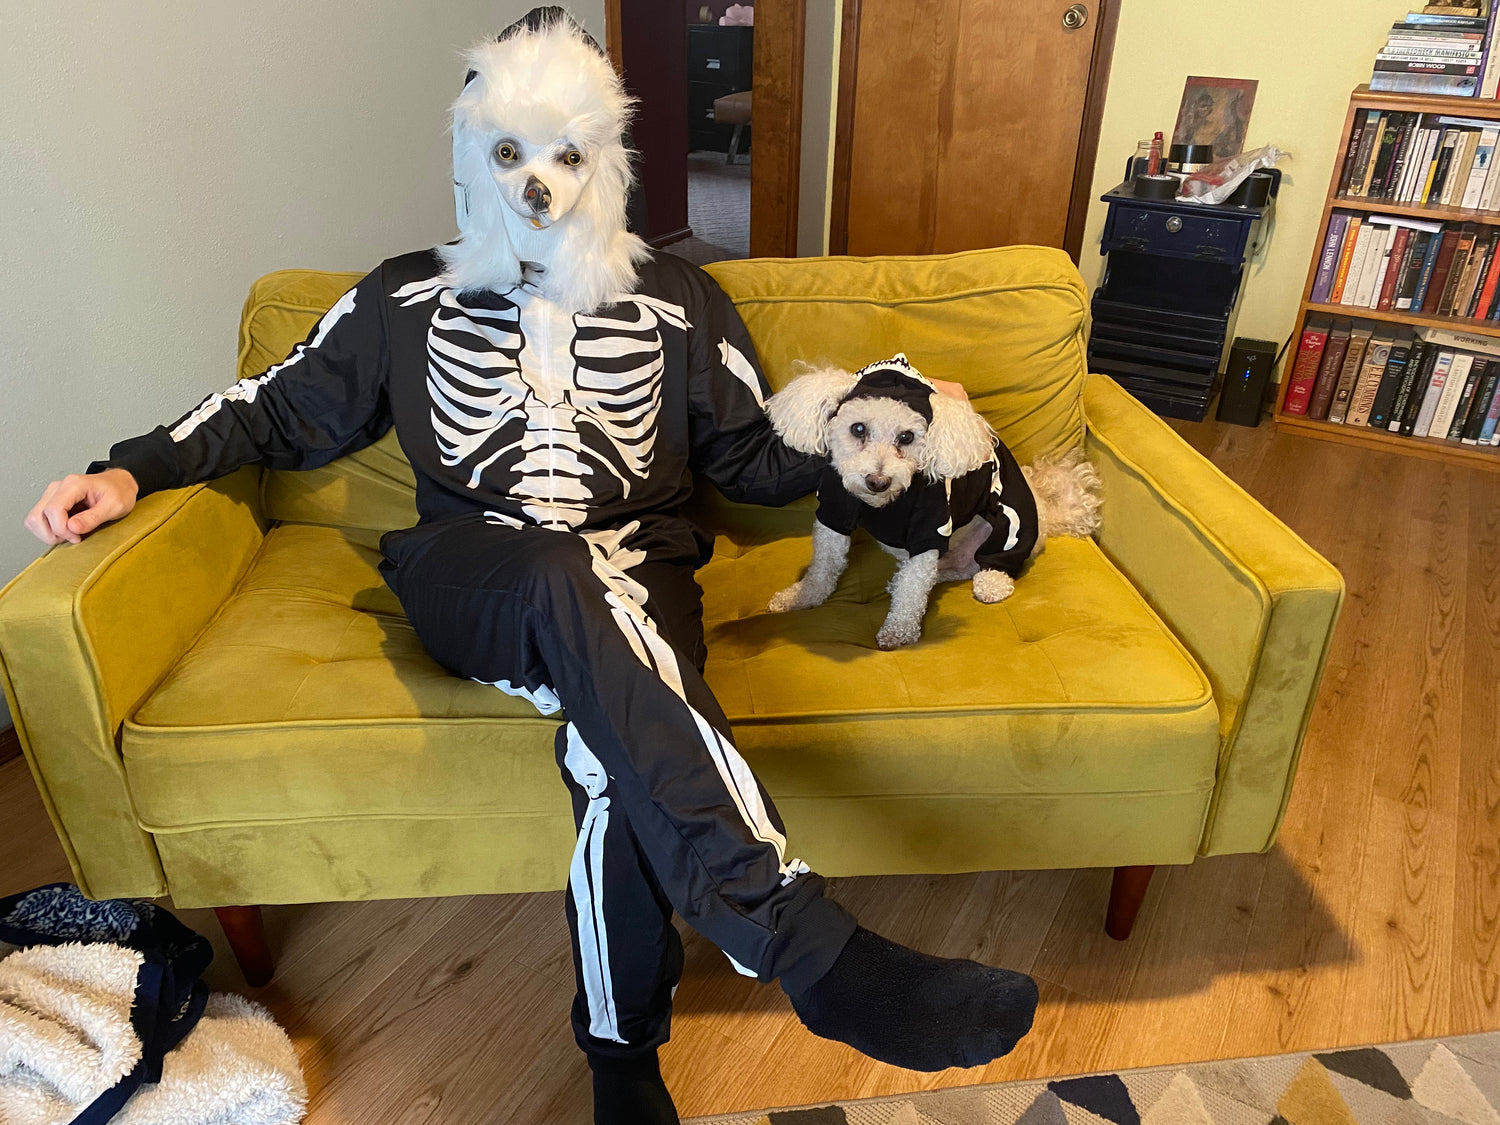 Photo of Nick and Jimmy the dog dressed in identical skeleton costumes